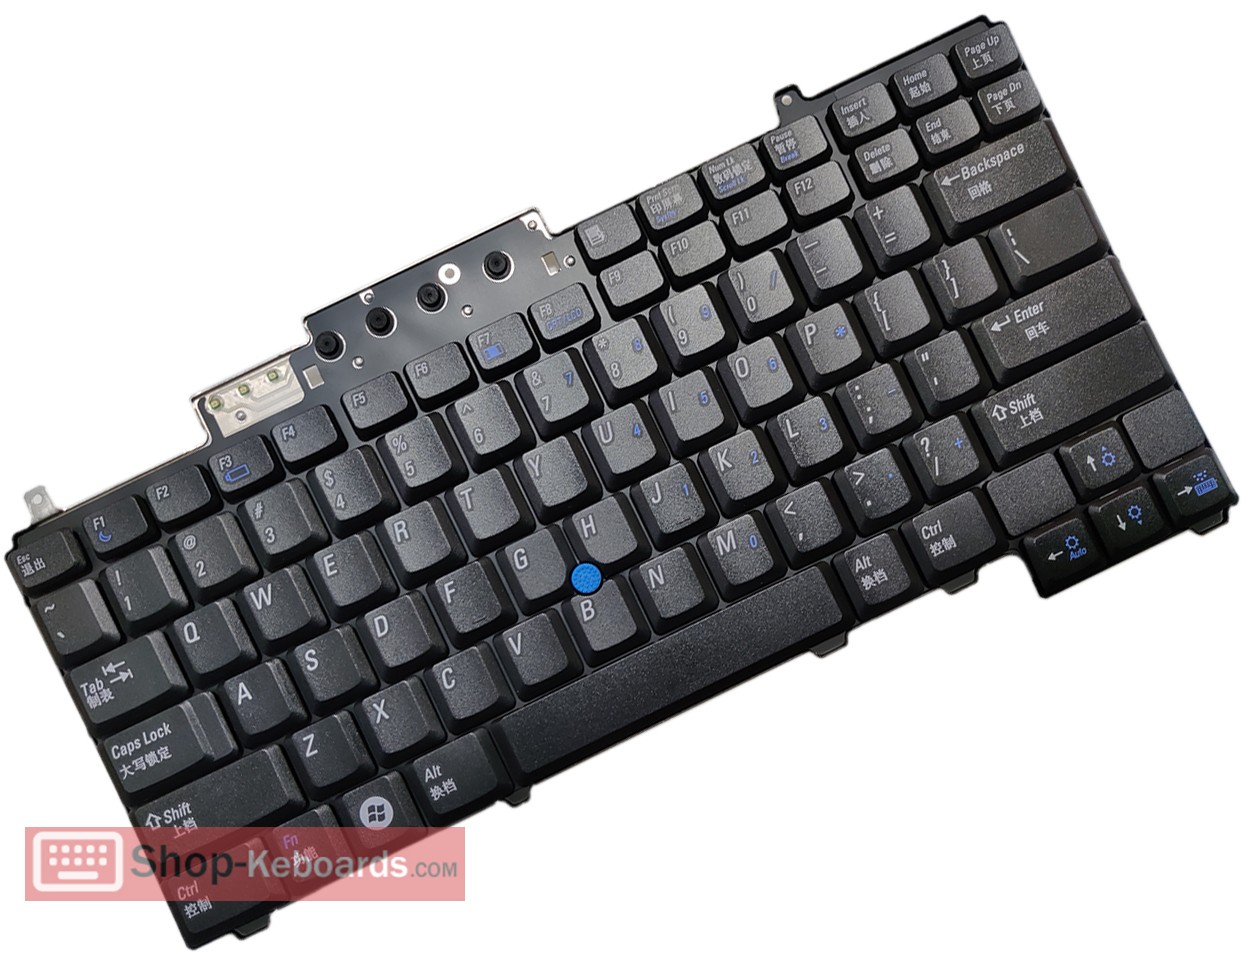 Dell Latitude D630 ATG Keyboard replacement